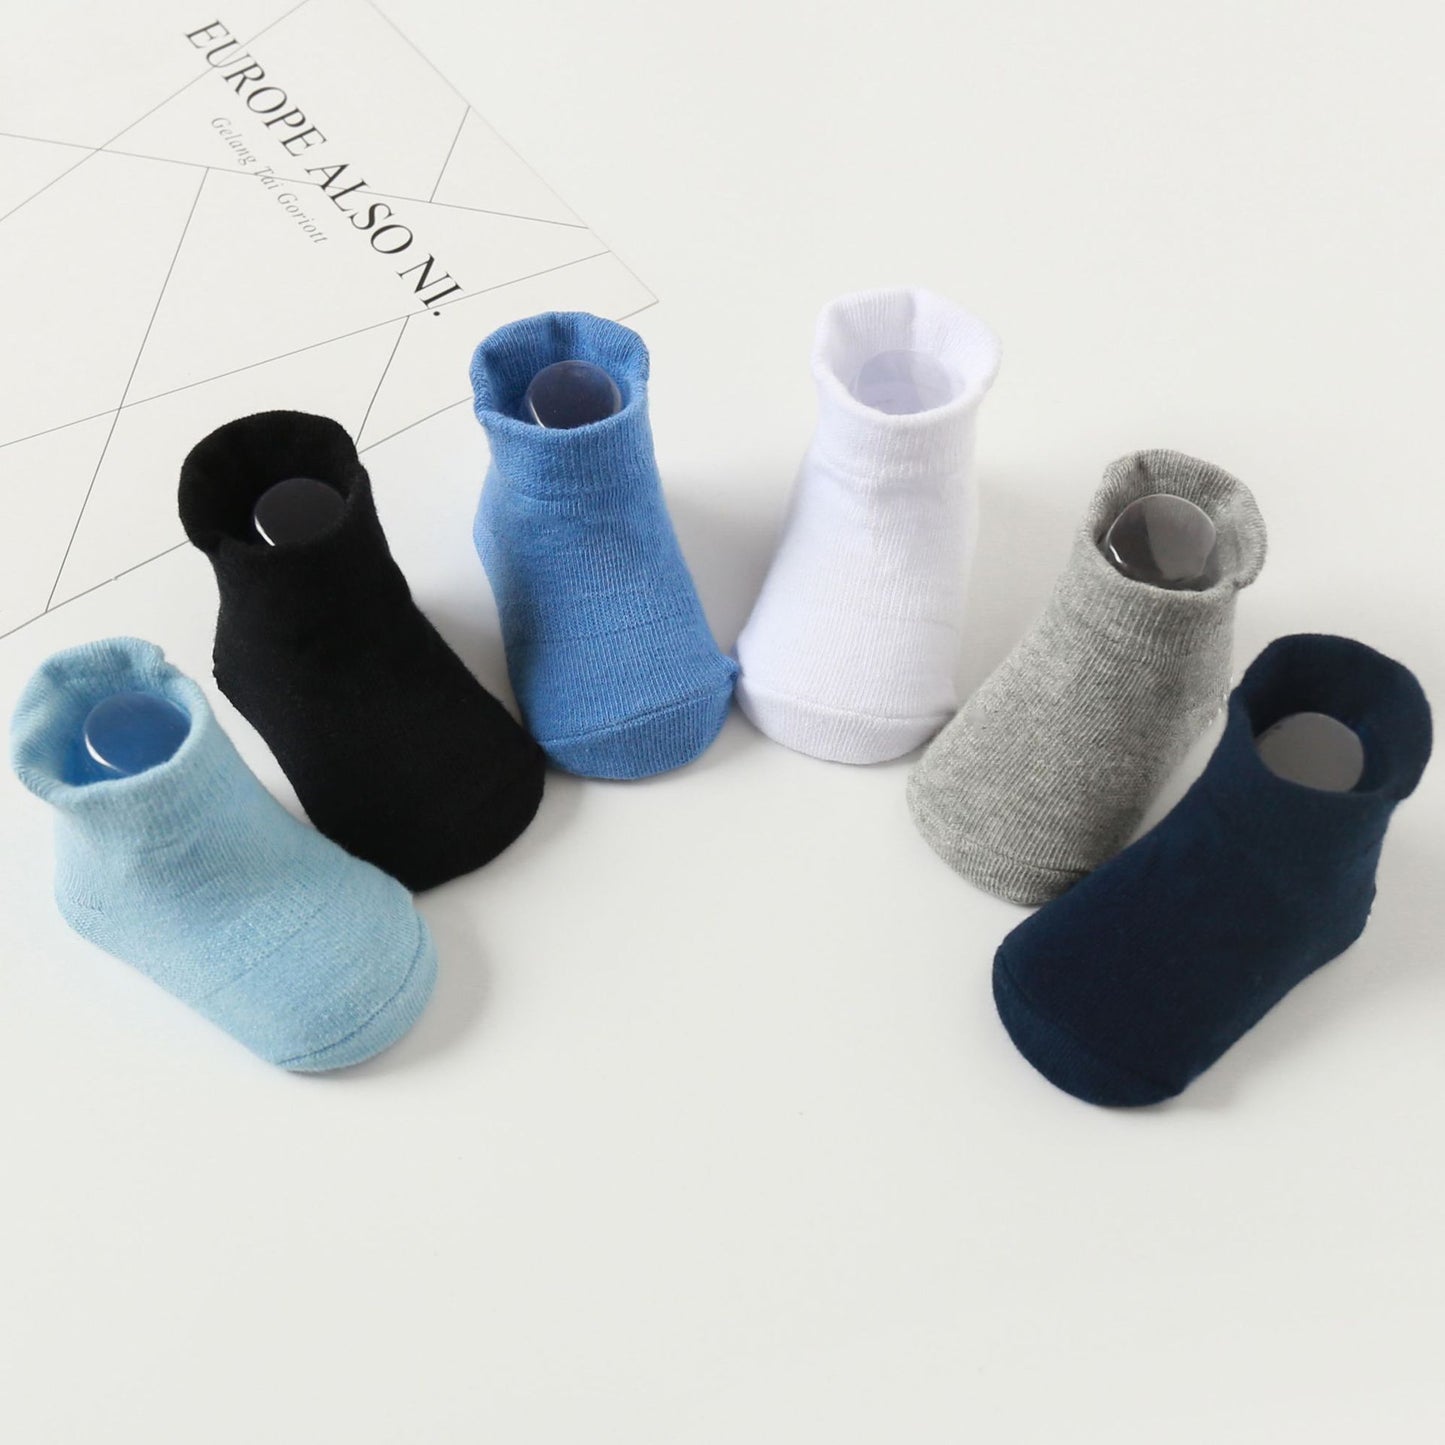 Anti-Slip, Ankle Socks for Toddlers - 6 Pairs